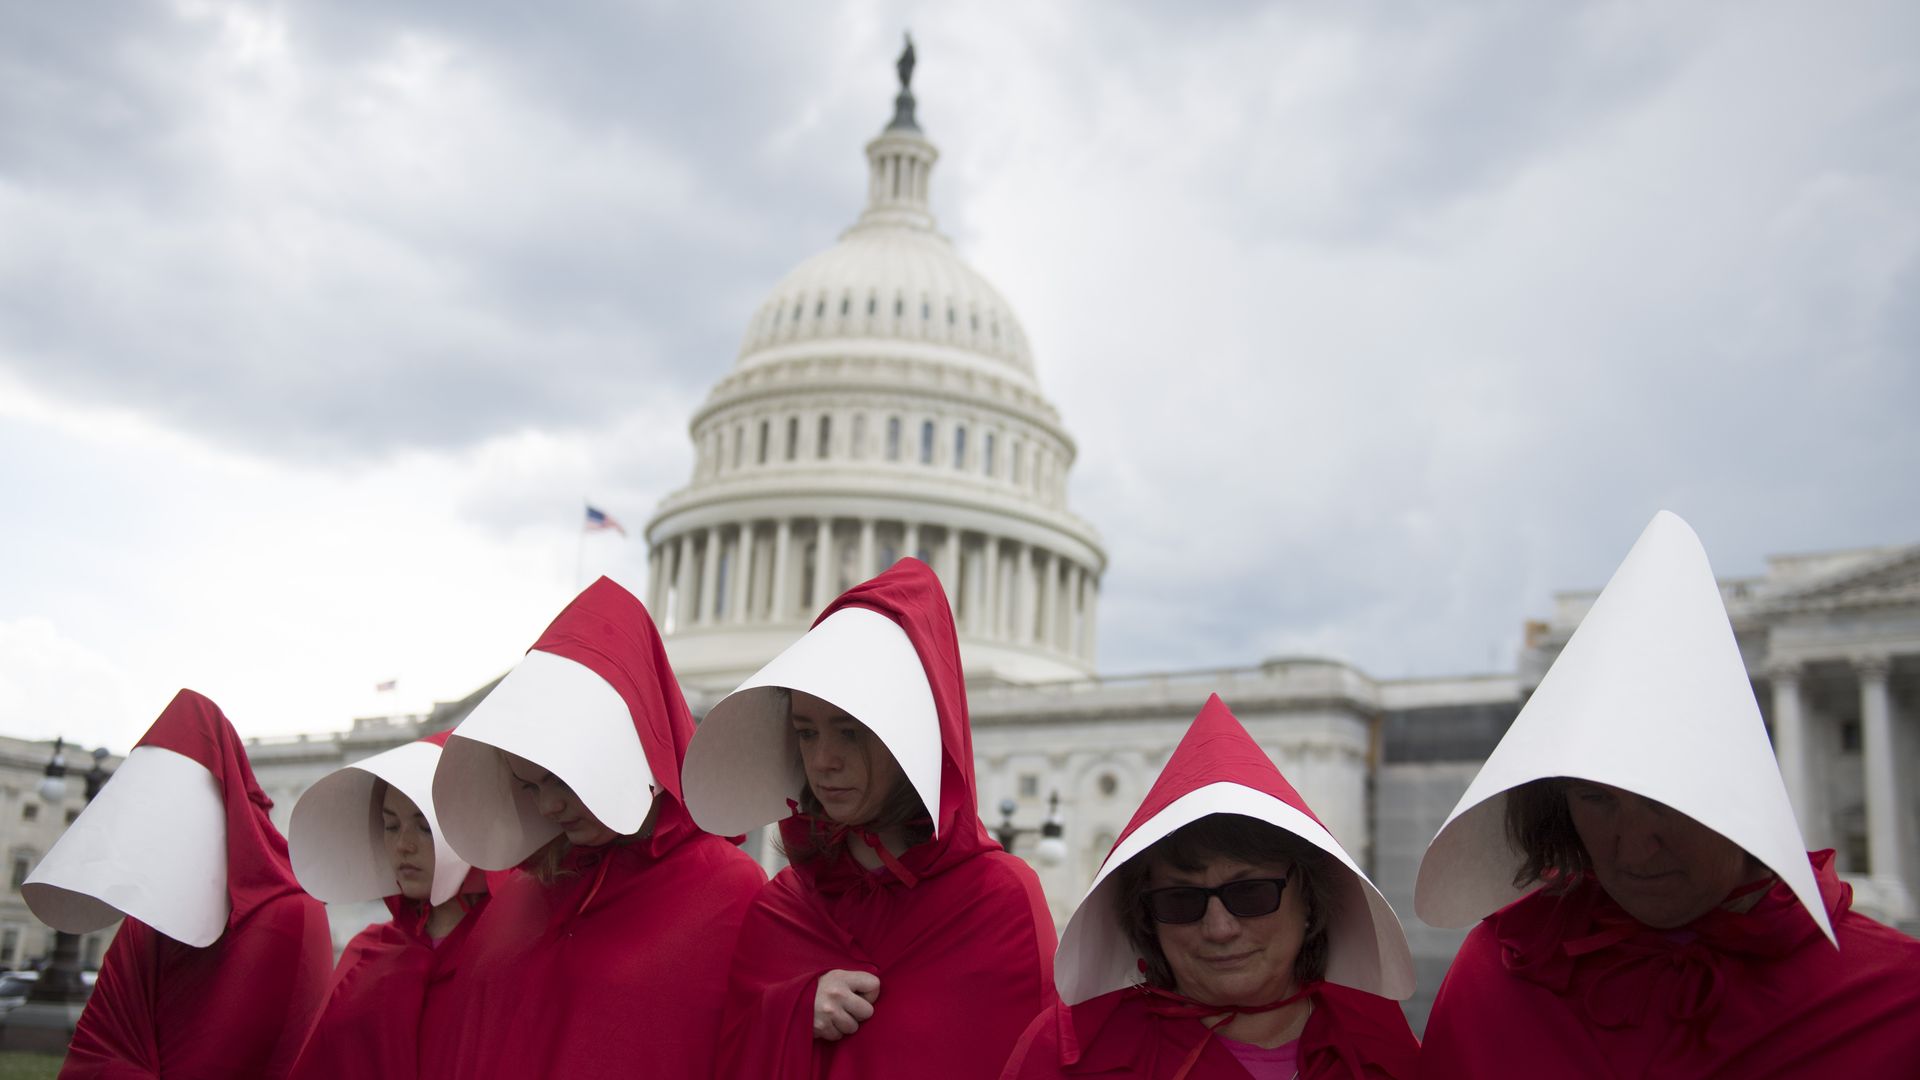 Supporters of Planned Parenthood dressed as characters from The Handmaid's Tale in red clothing and white hats in front of the Capitol Dome.